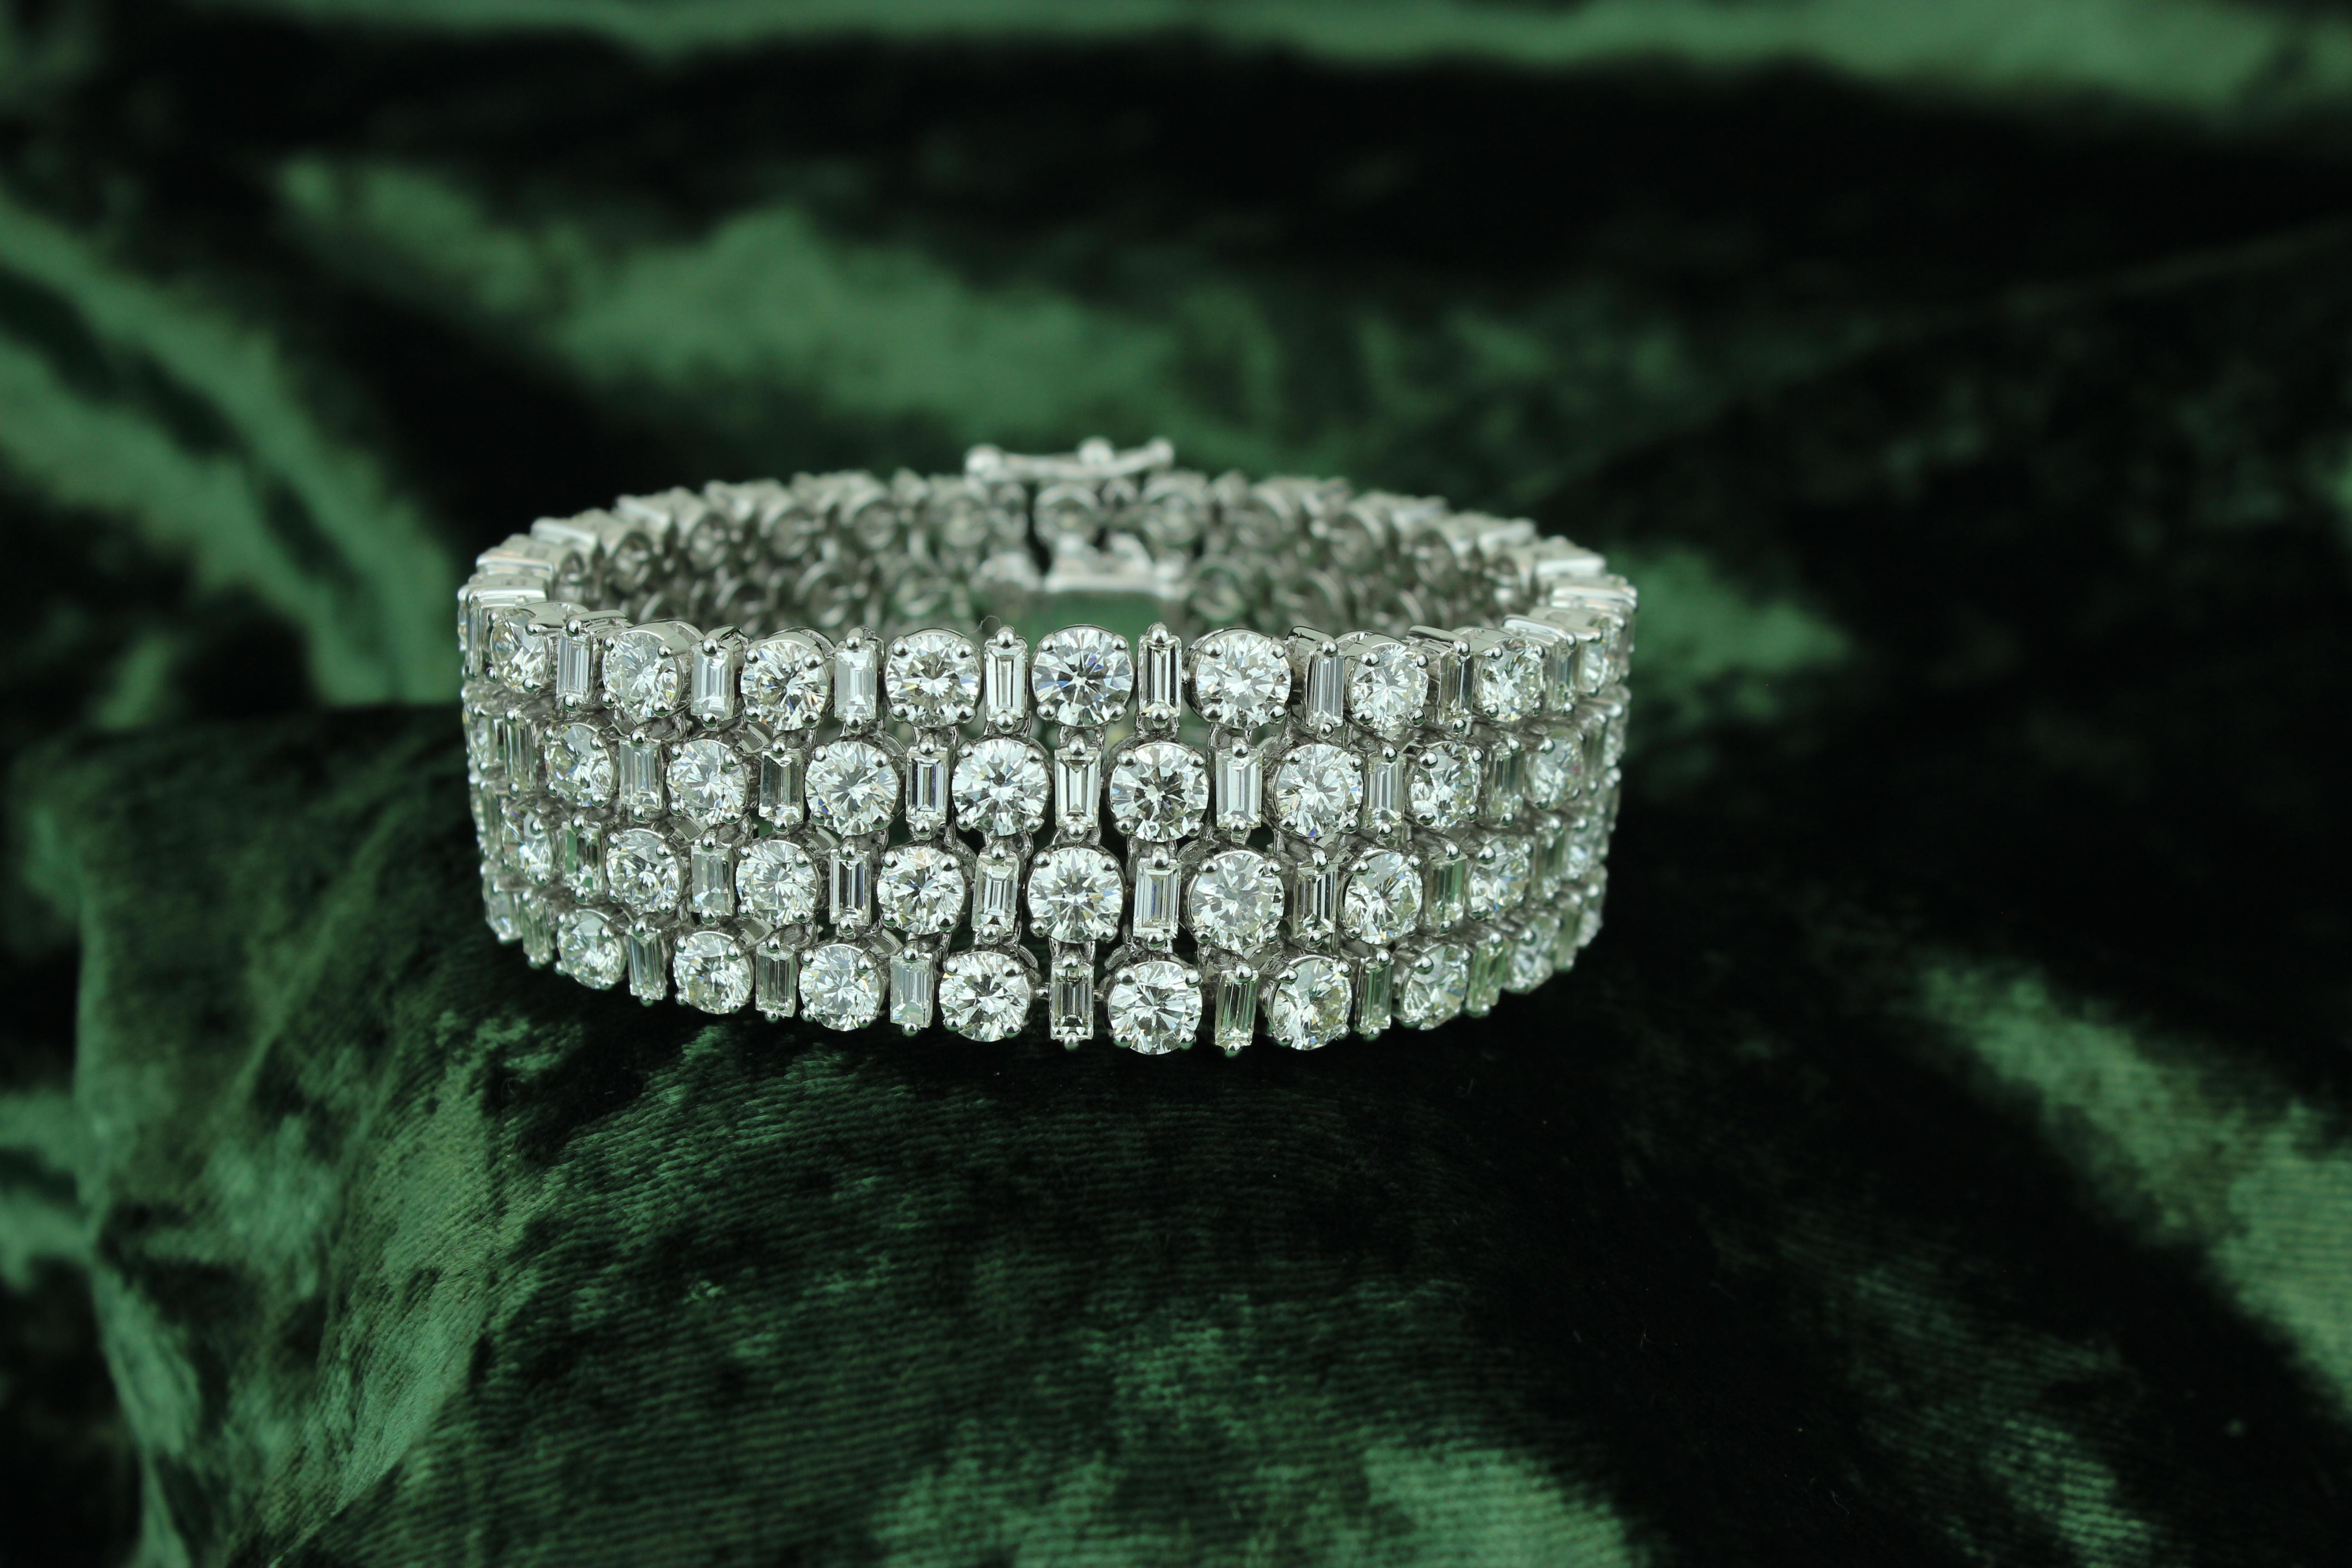 This bracelet features a broad design that adds a sense of opulence and grandeur to your persona. Crafted from 18k solid gold, the alternating arrangement of baguette and round diamonds creates a captivating visual pattern. Baguette diamonds, with